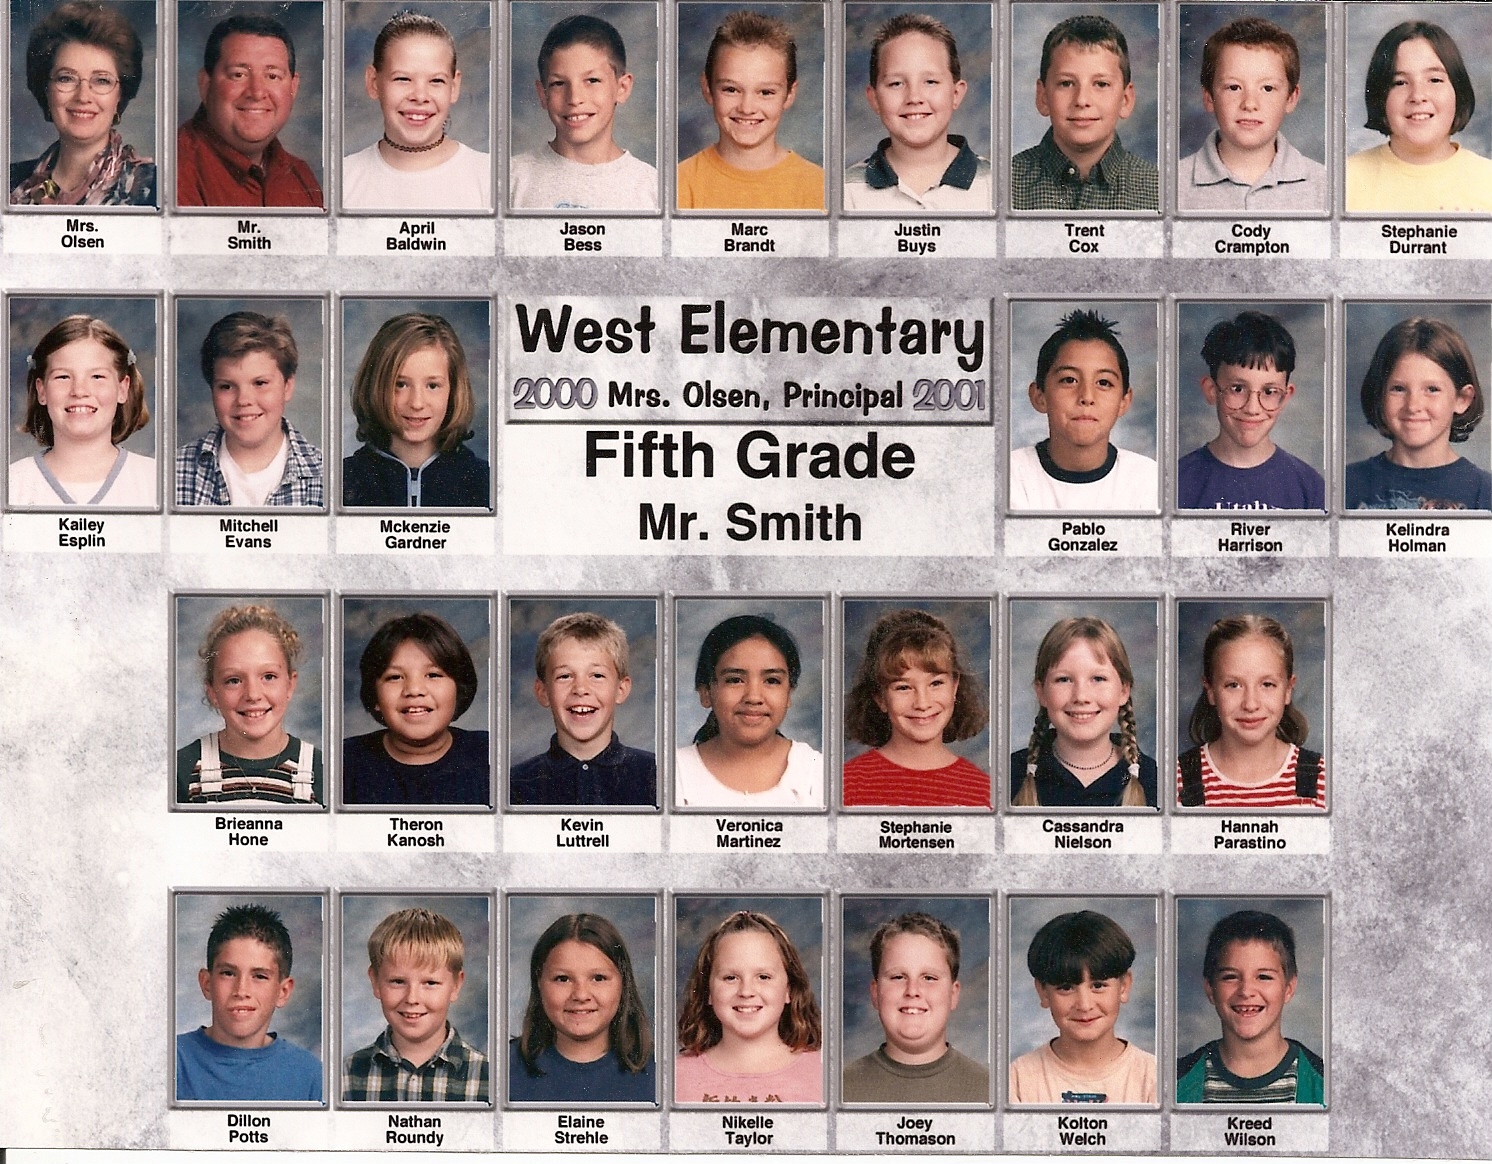 Mr. Smith's 2000-2001 fifth grade class at West Elementary School